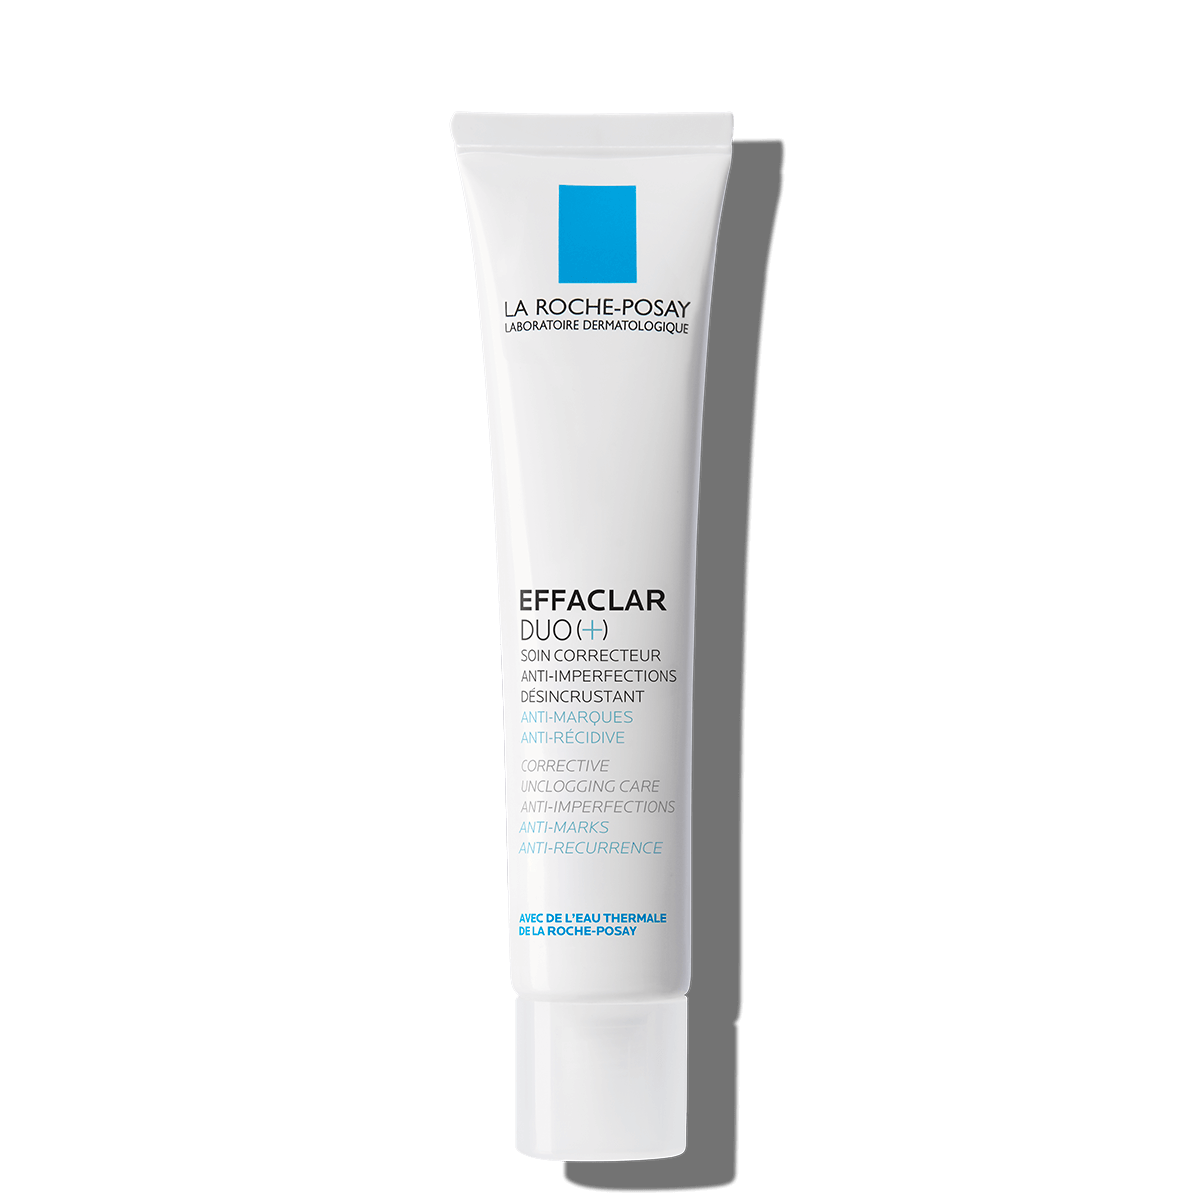 A photo of the front of a Effaclar Duo+ skincare product bottle